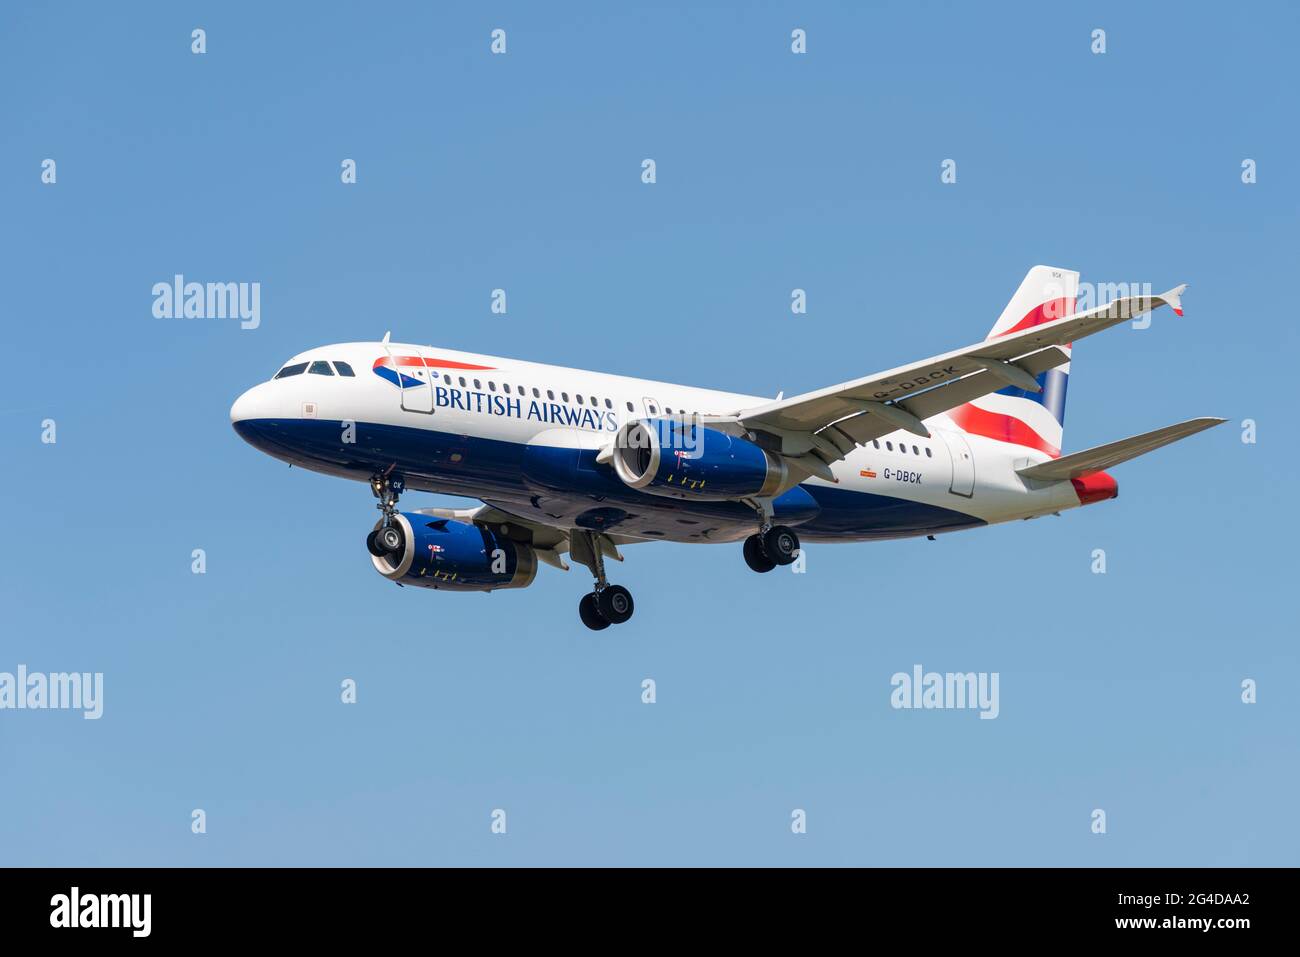 British Airways Airbus A319 airliner jet plane G-DBCK coming in on finals to land at London Heathrow Airport, UK. Small, old short haul airliner Stock Photo